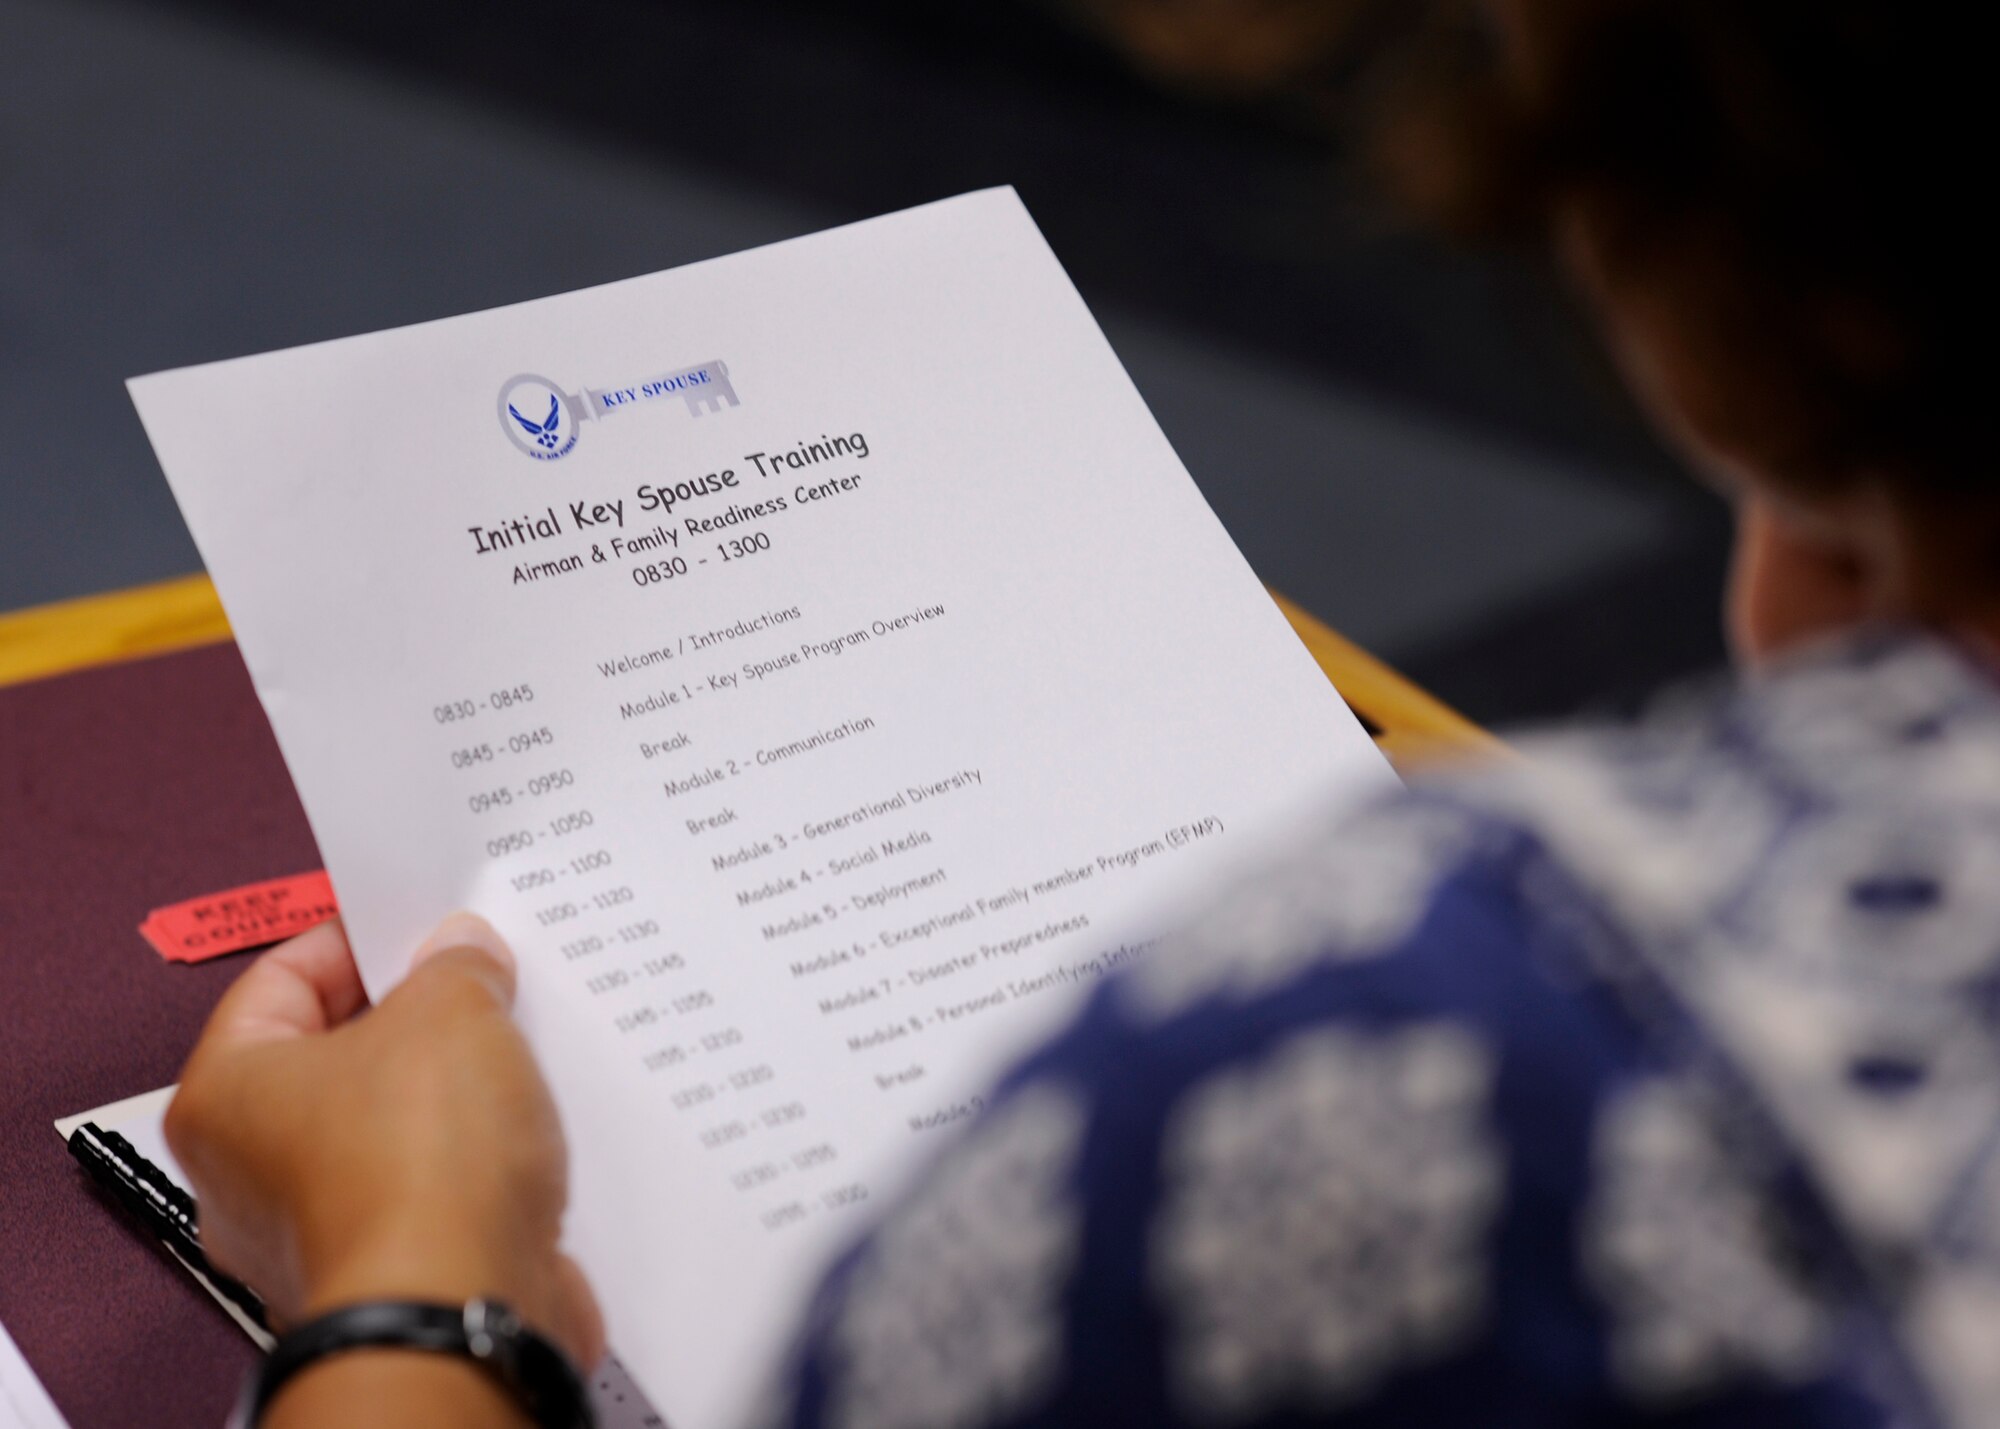 An individual looks over the key spouse training itinerary at the Airman & Family Readiness Center Aug. 16, 2016. New key spouses attended a six-hour training course, where they learned the importance of communication, disaster preparedness and resilience, within their new position and the role of the key spouse within the unit. (U.S. Air Force photo by Senior Airman Solomon Cook/Released)